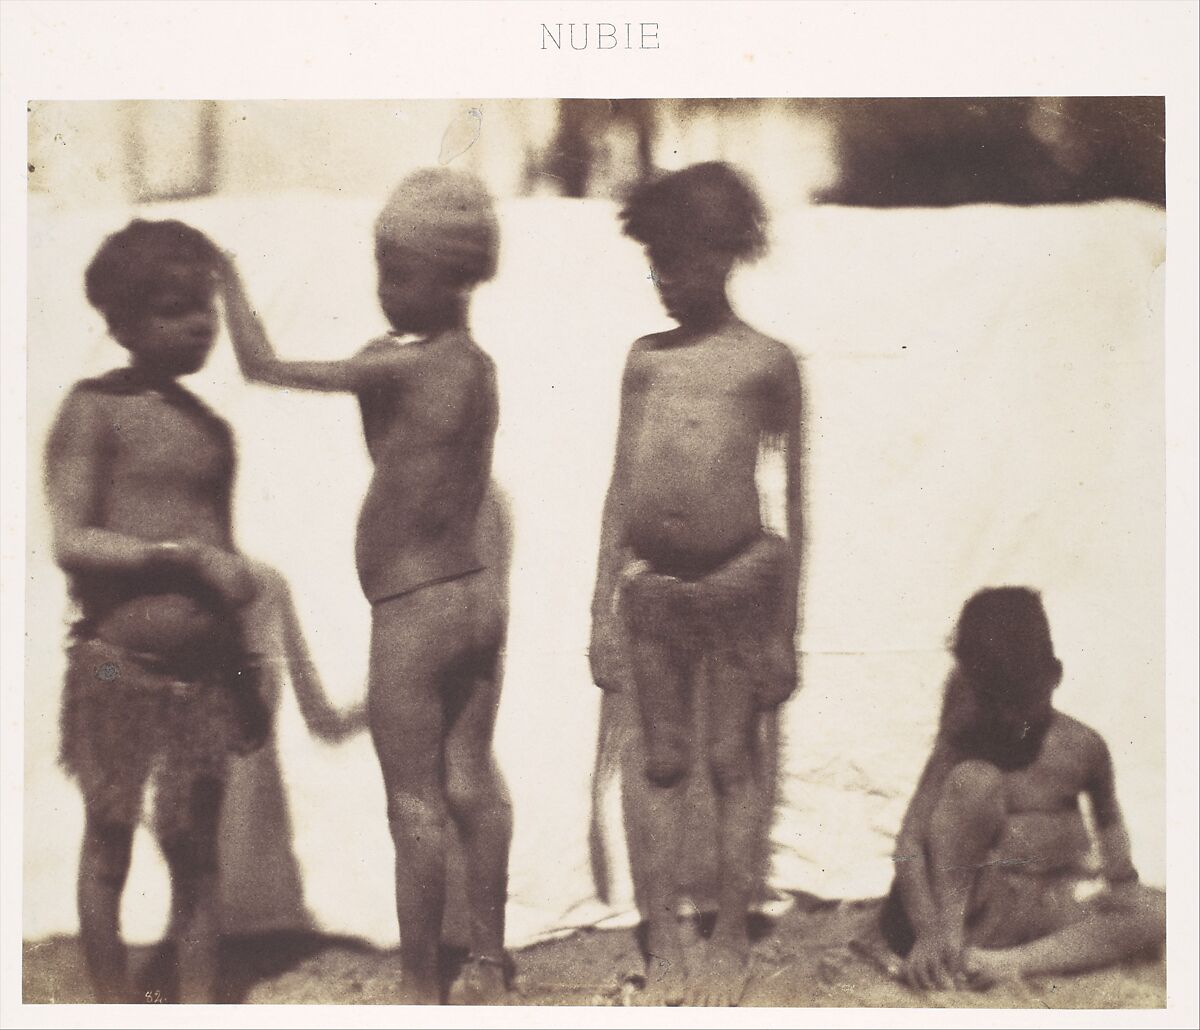 [Children from the Village of Kalabshah, Nubia]